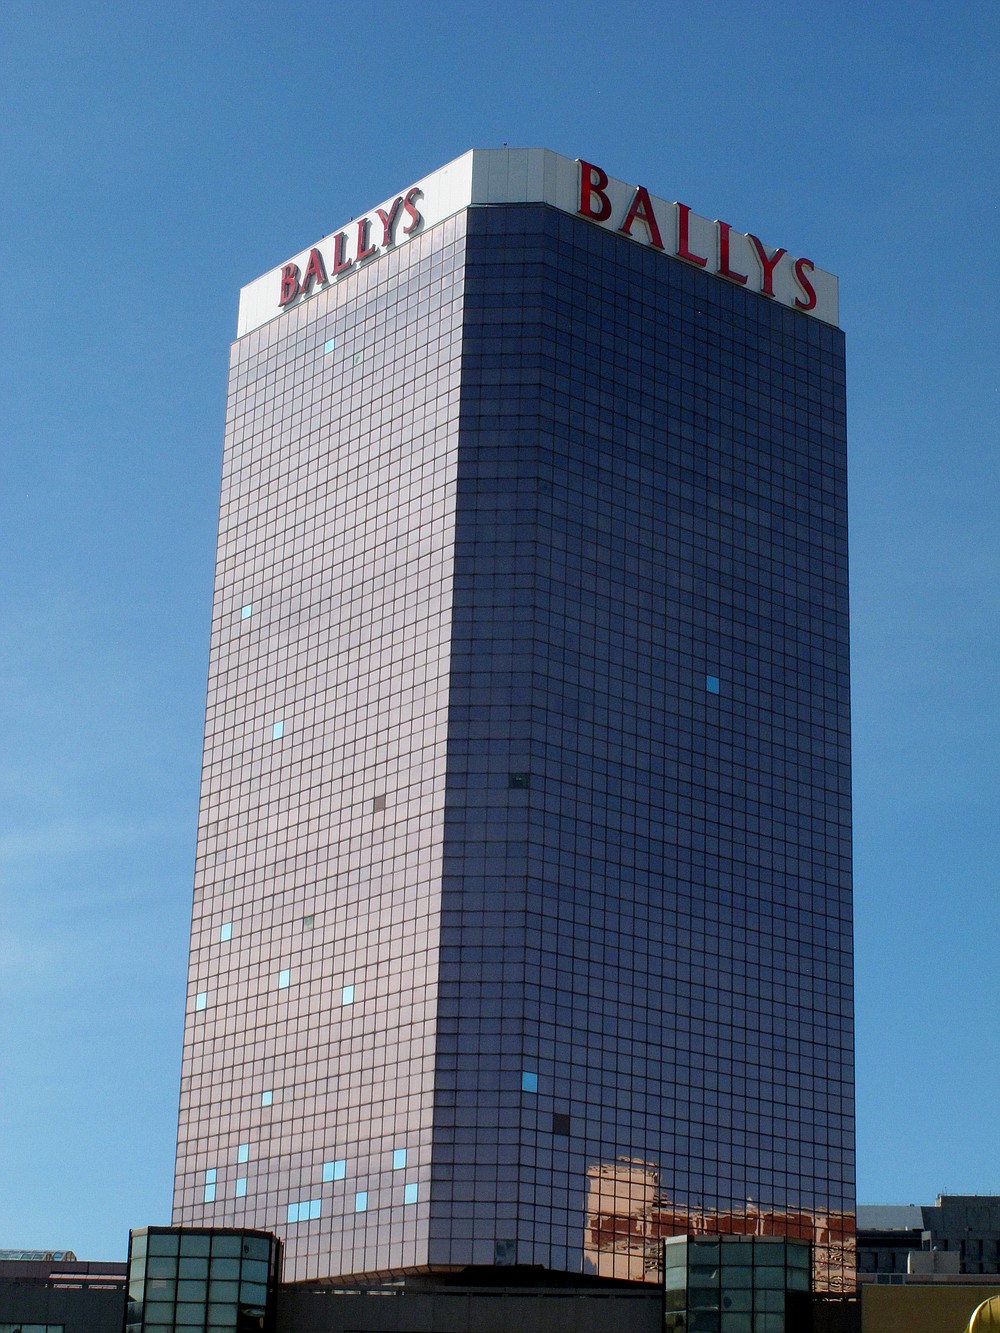 This Oct. 1, 2020 photo shows the exterior of Bally's casino in Atlantic City N.J.  The new owners of Bally's Atlantic City are attempting to revive a comatose casino in perhaps the most cutthroat gambling market in America. Rhode Island-based Bally's Corporation is spending at least $90 million on the Boardwalk casino over the next five years, including hotel room makeovers, a renovation of the casino floor, new slot machines and restaurants, and more live entertainment.  (AP Photo/Wayne Parry)